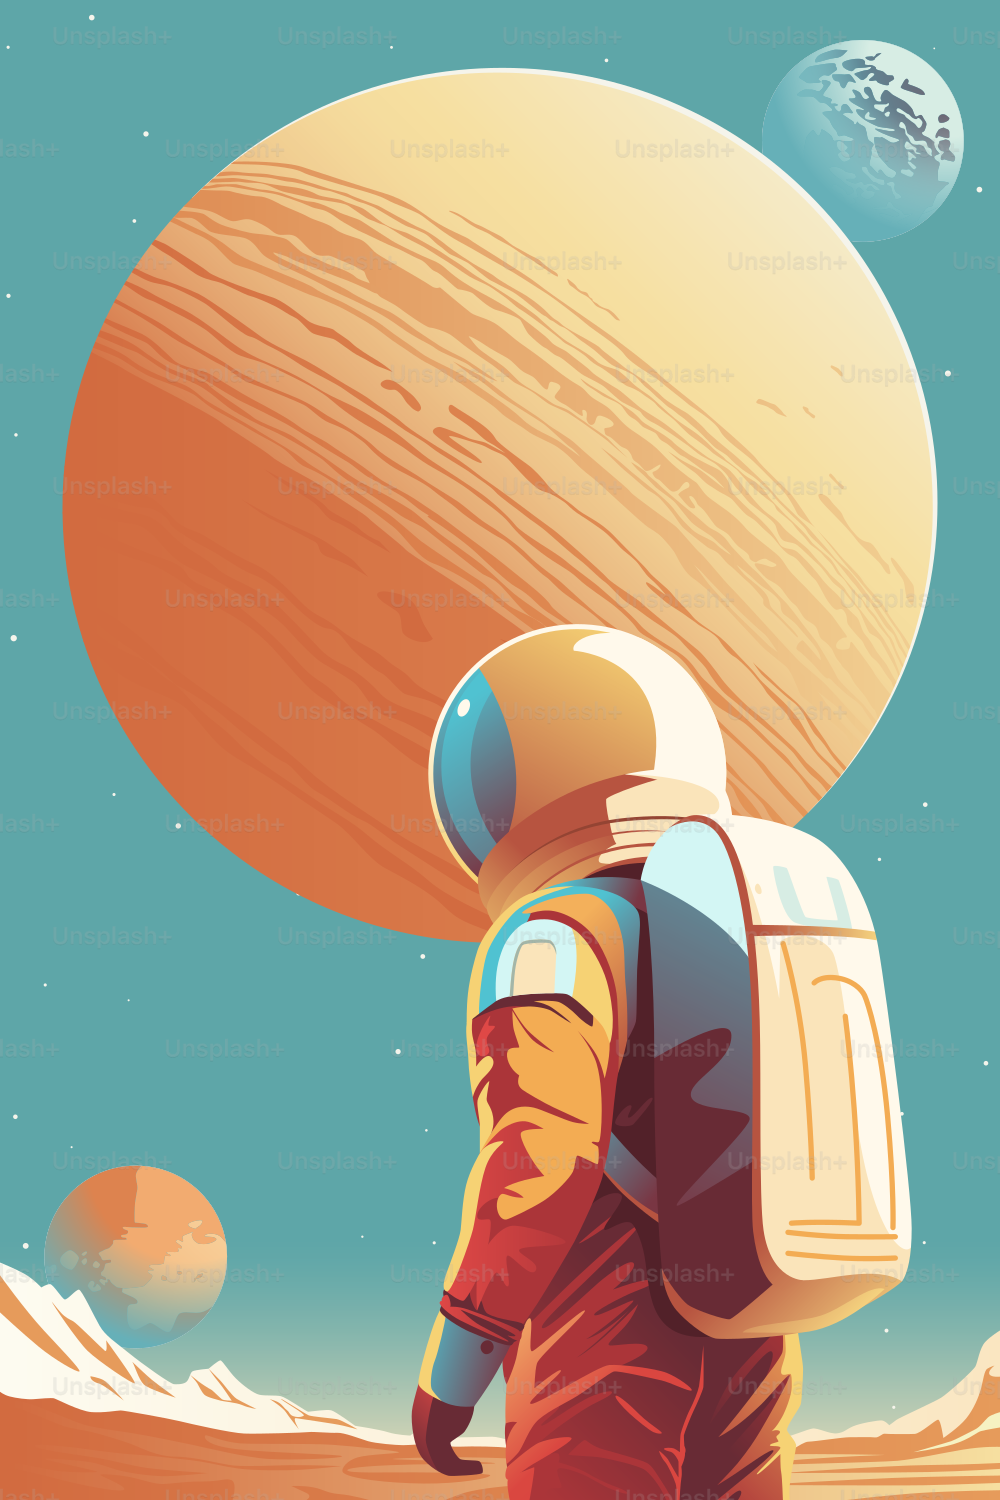 Human Space Exploration Futuristic Poster. An Astronaut on the Surface of Newly Discovered Planet Against Unfamiliar Skies with New Ones to Explore.